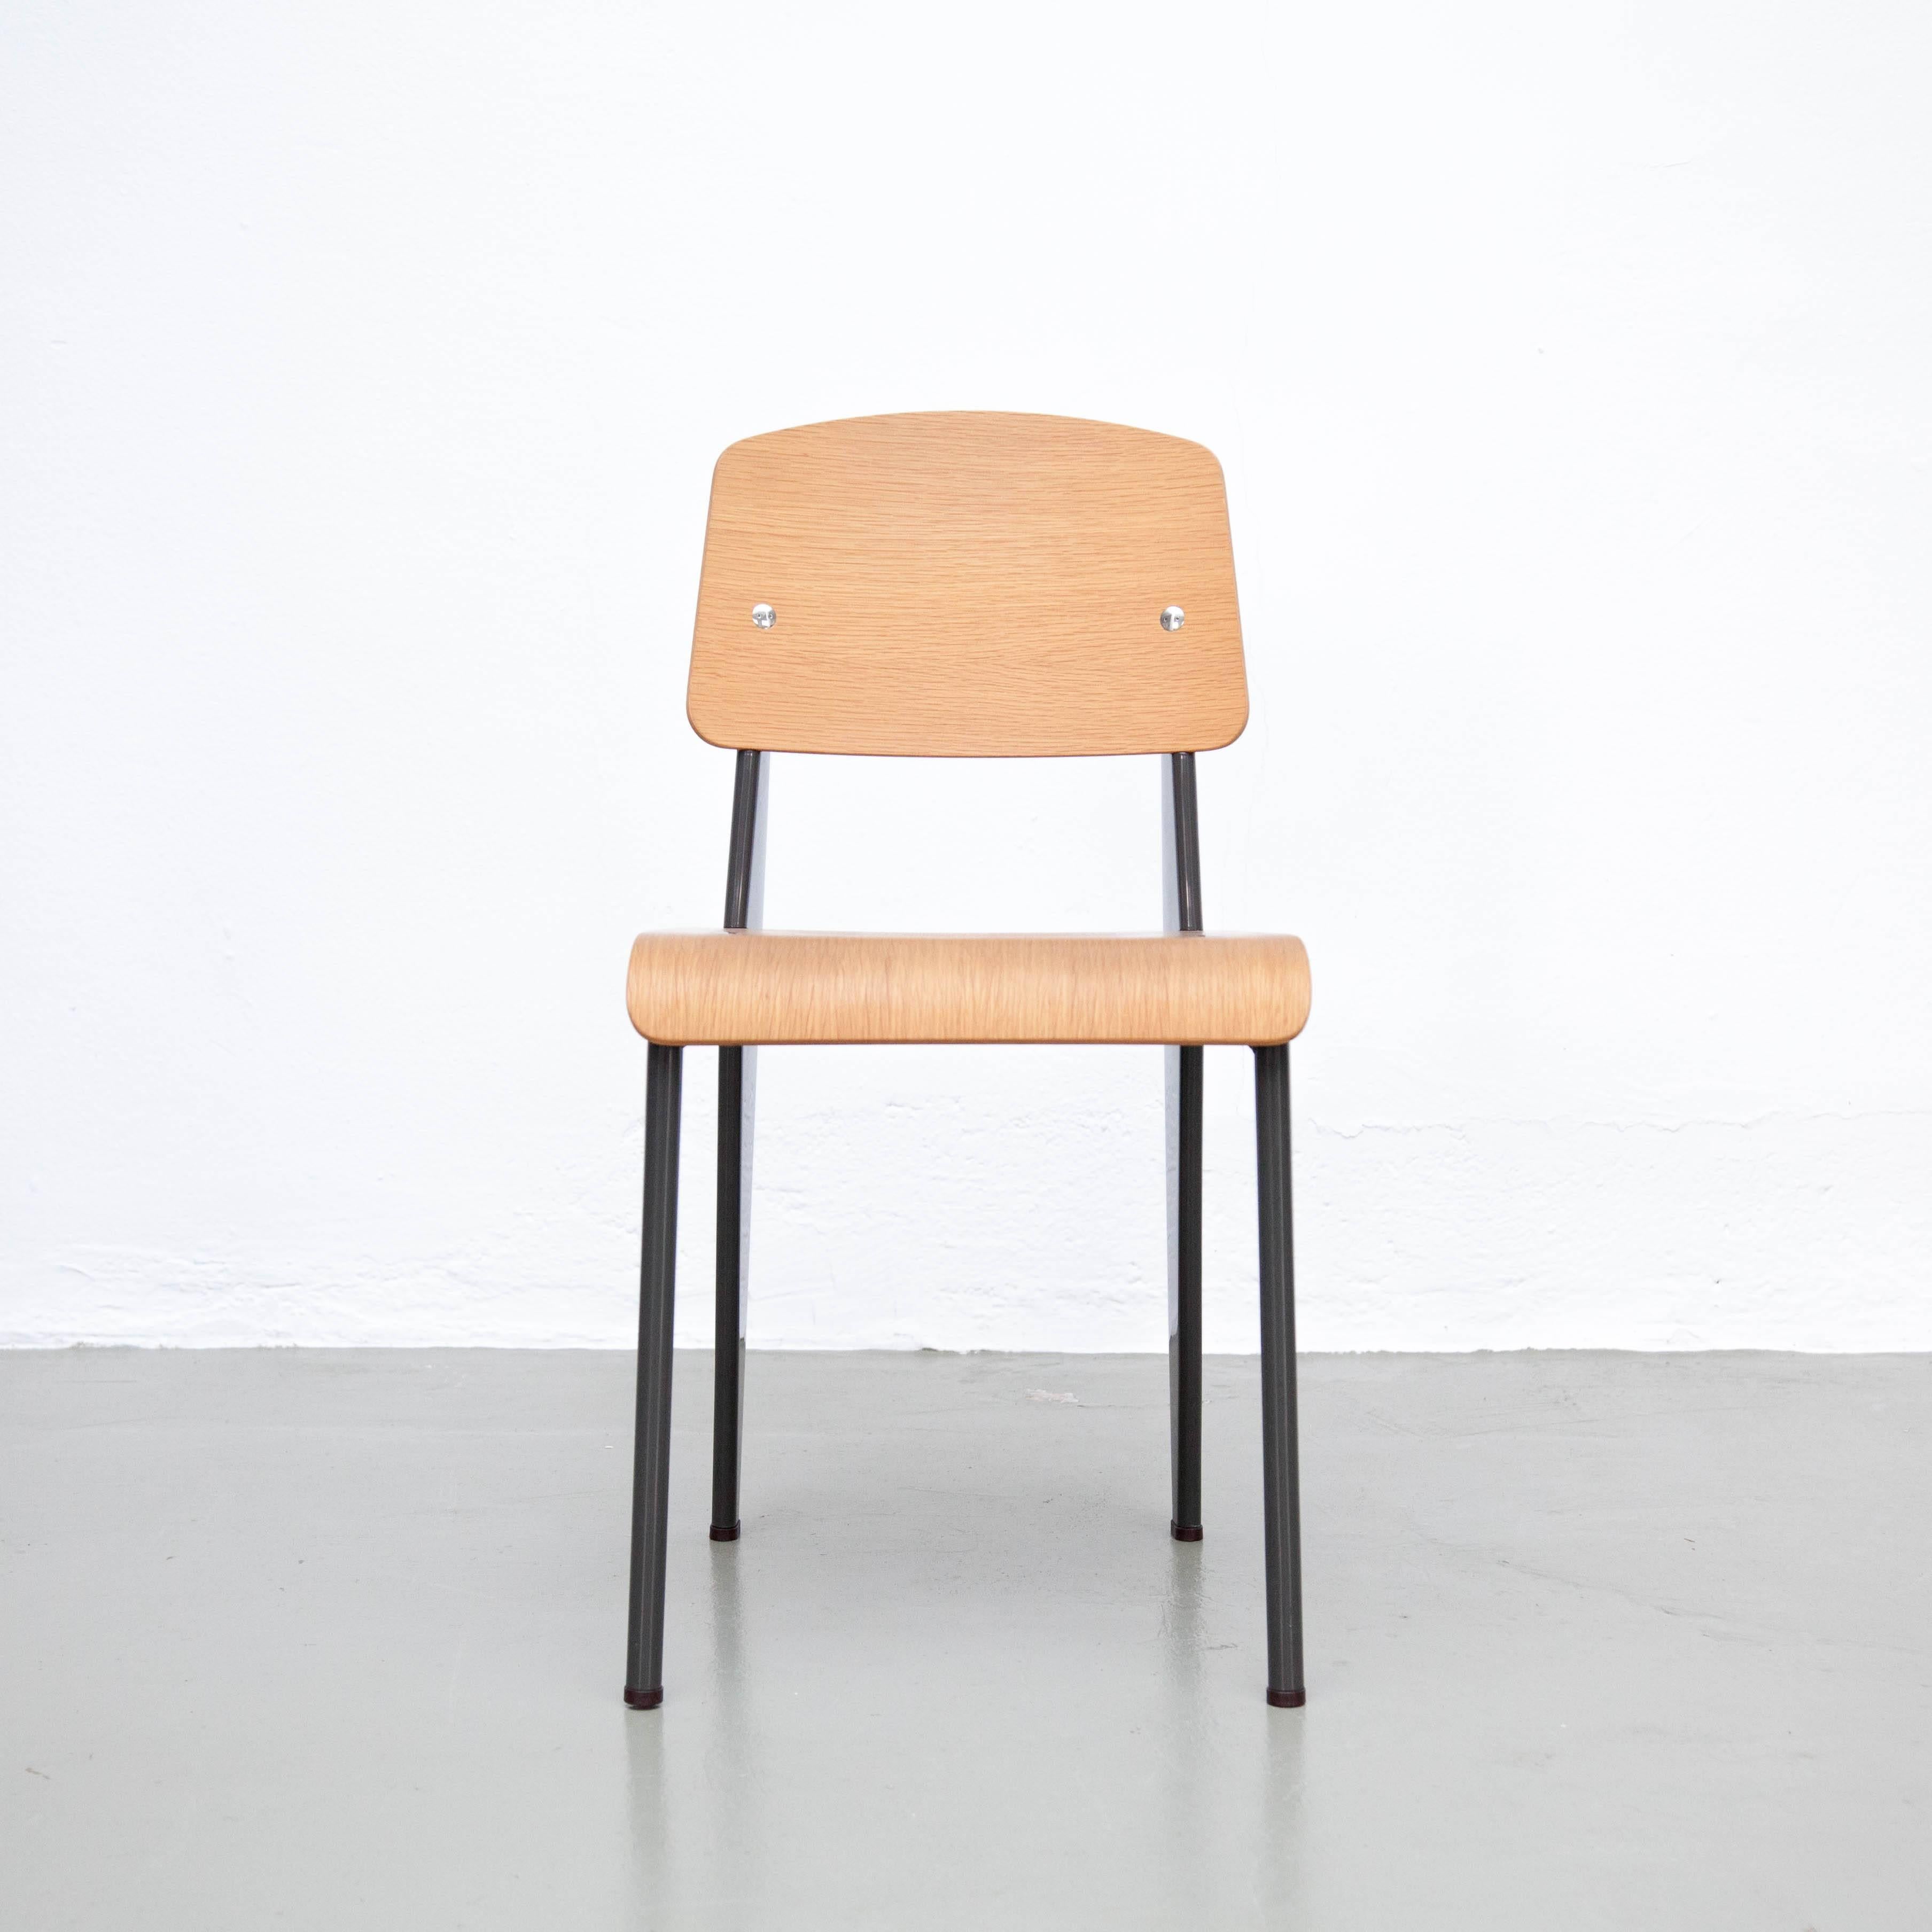 Jean Prouve Limited Edition Standard Chair by G-Star for Vitra (Metall)